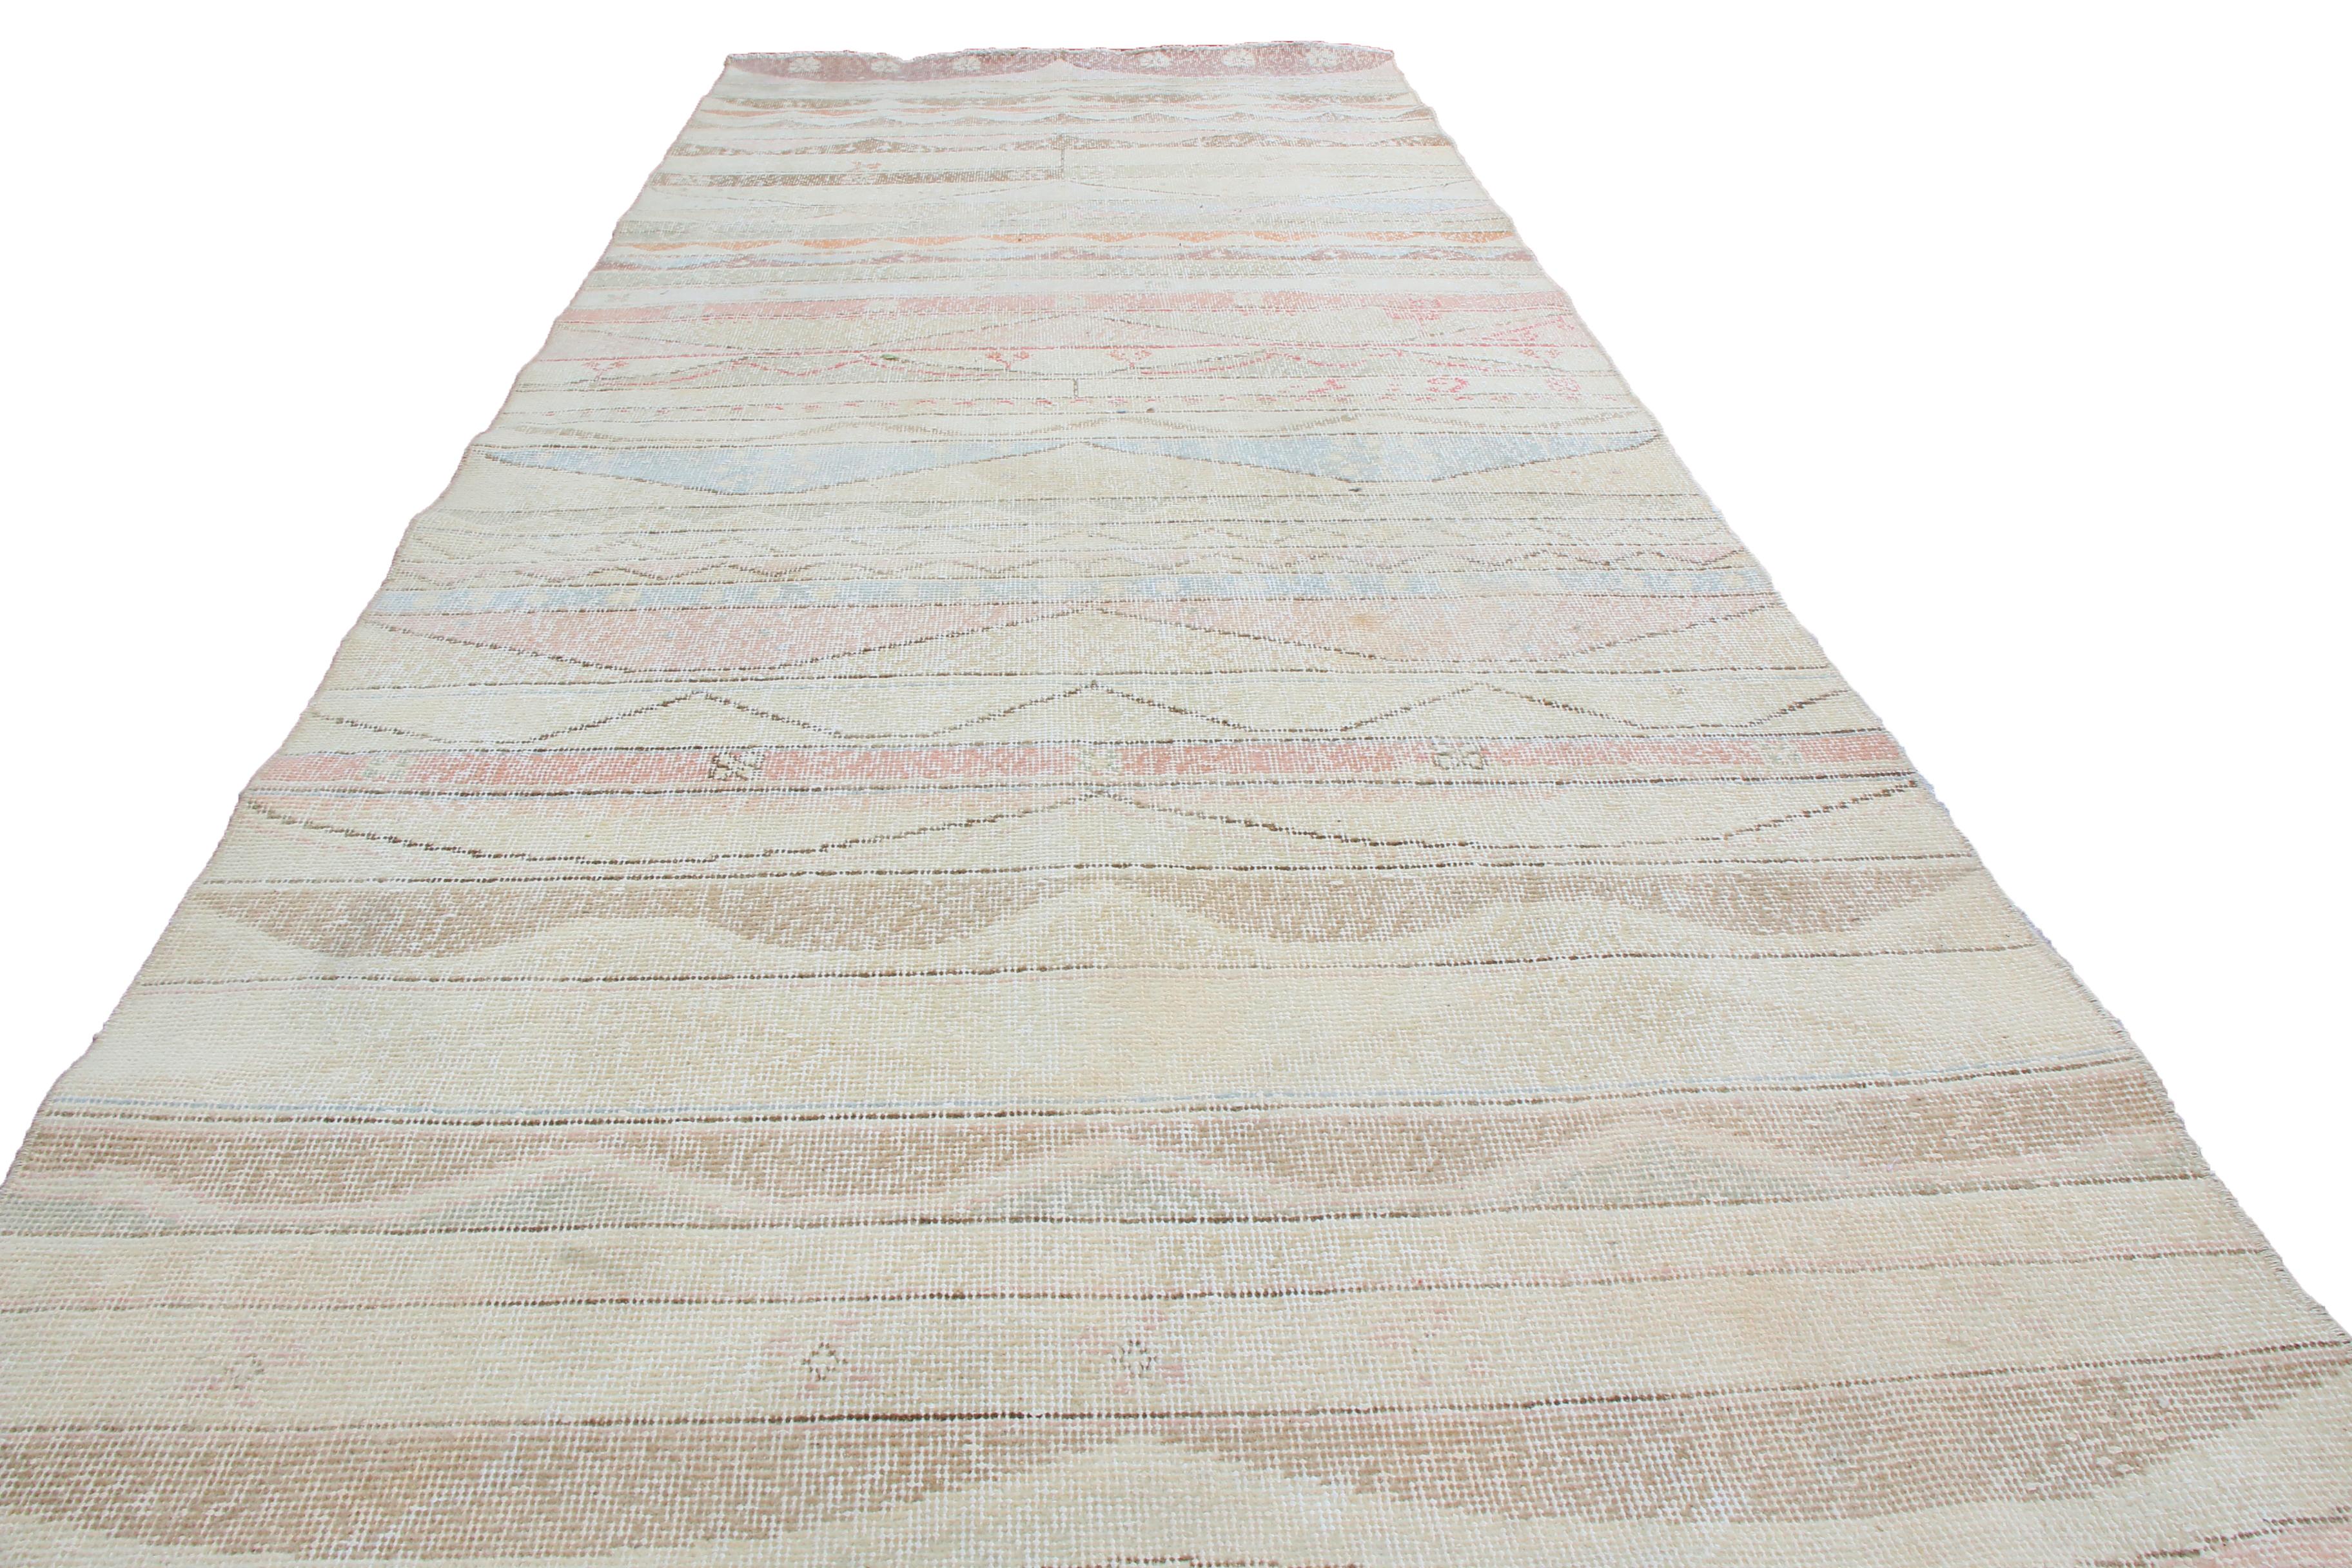 Originating from Turkey in 1940 featuring hand knotted, high quality wool and this vintage geometric rug hosts remarkably subtle floral imagery in the rows defining its field design, complemented by a uniquely fine guard border enveloping pastel